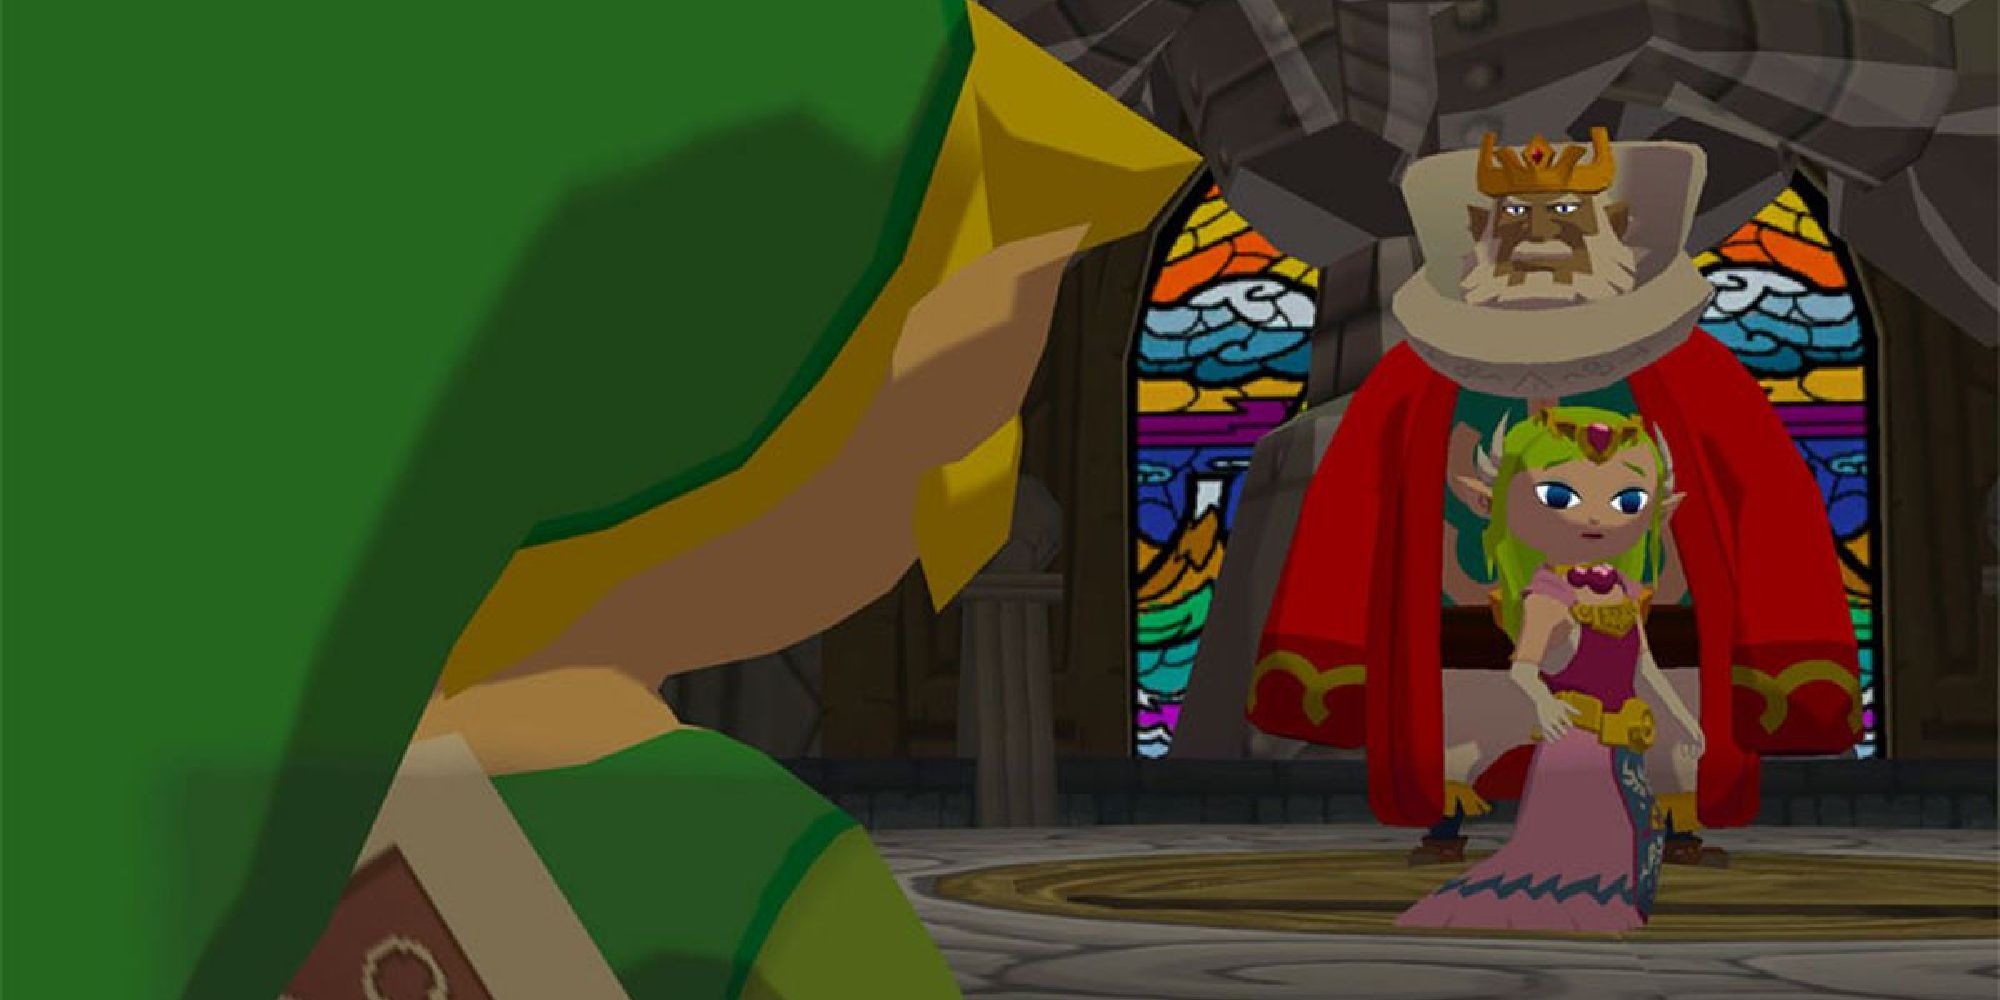 Link looking at Zelda and King Daphne standing in Hyrule Castle in Wind Waker